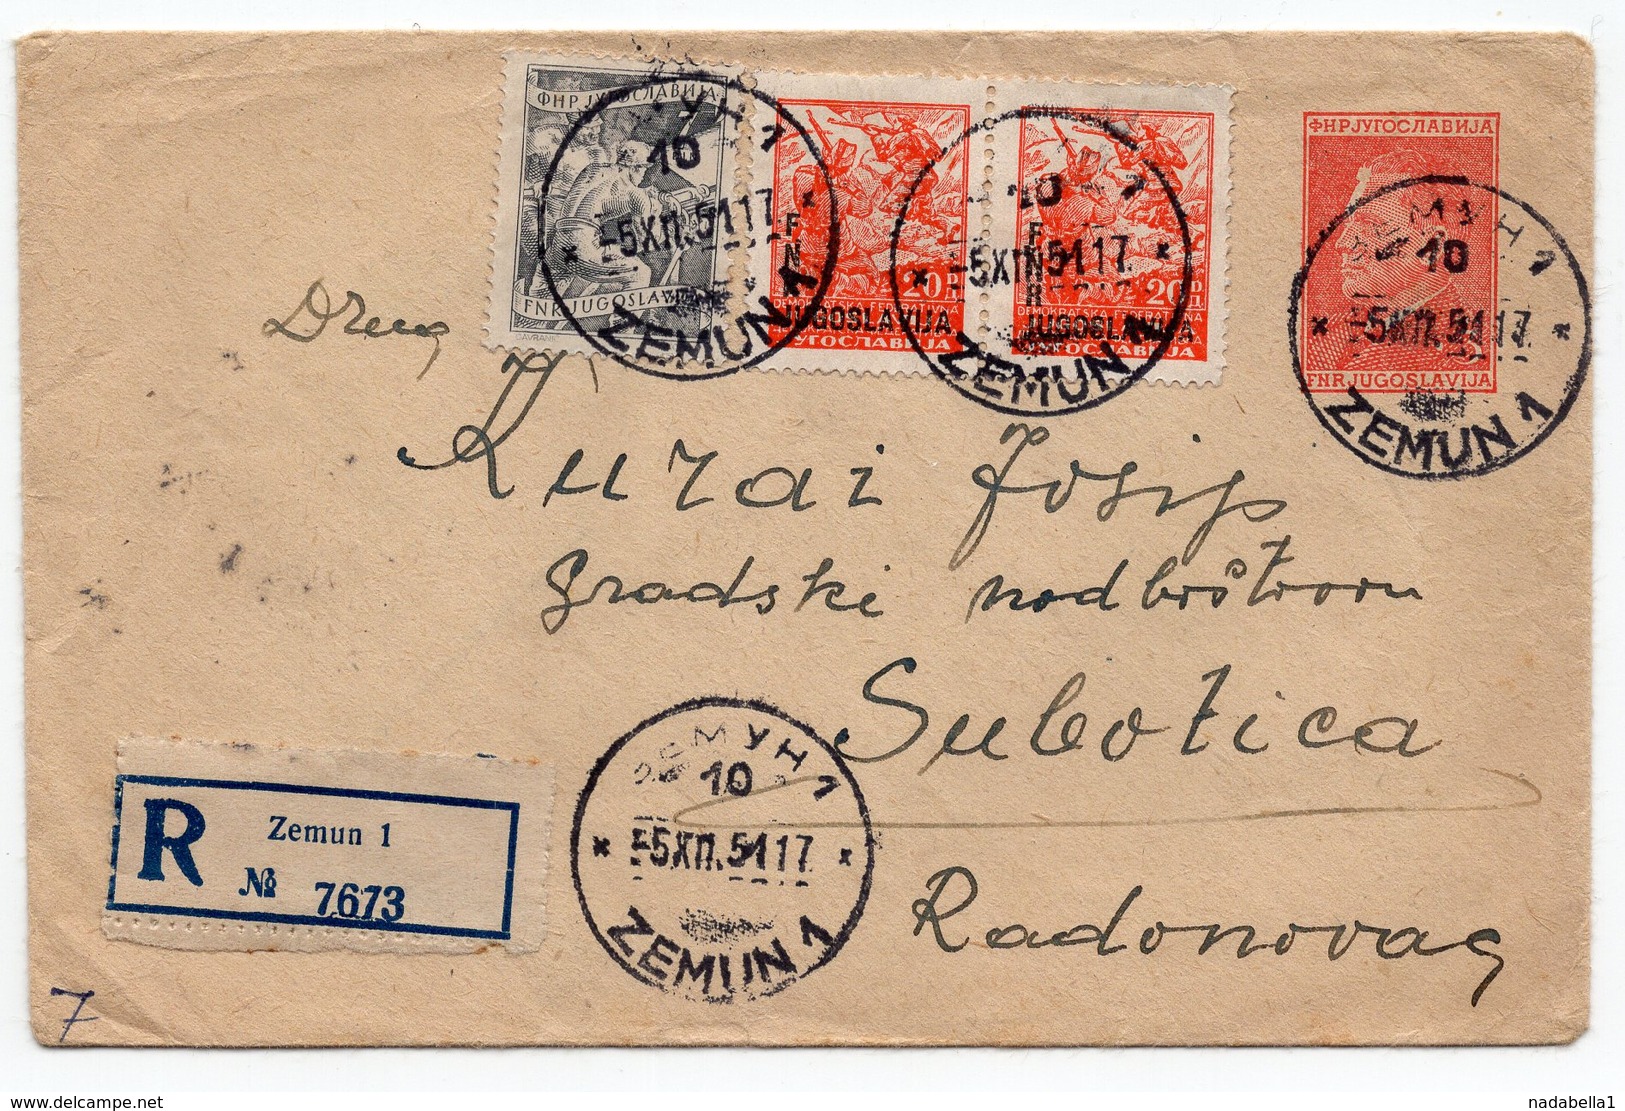 1951 YUGOSLAVIA, SERBIA, TITO, STATIONARY, REGISTERED COVER TO SUBOTICA - Covers & Documents